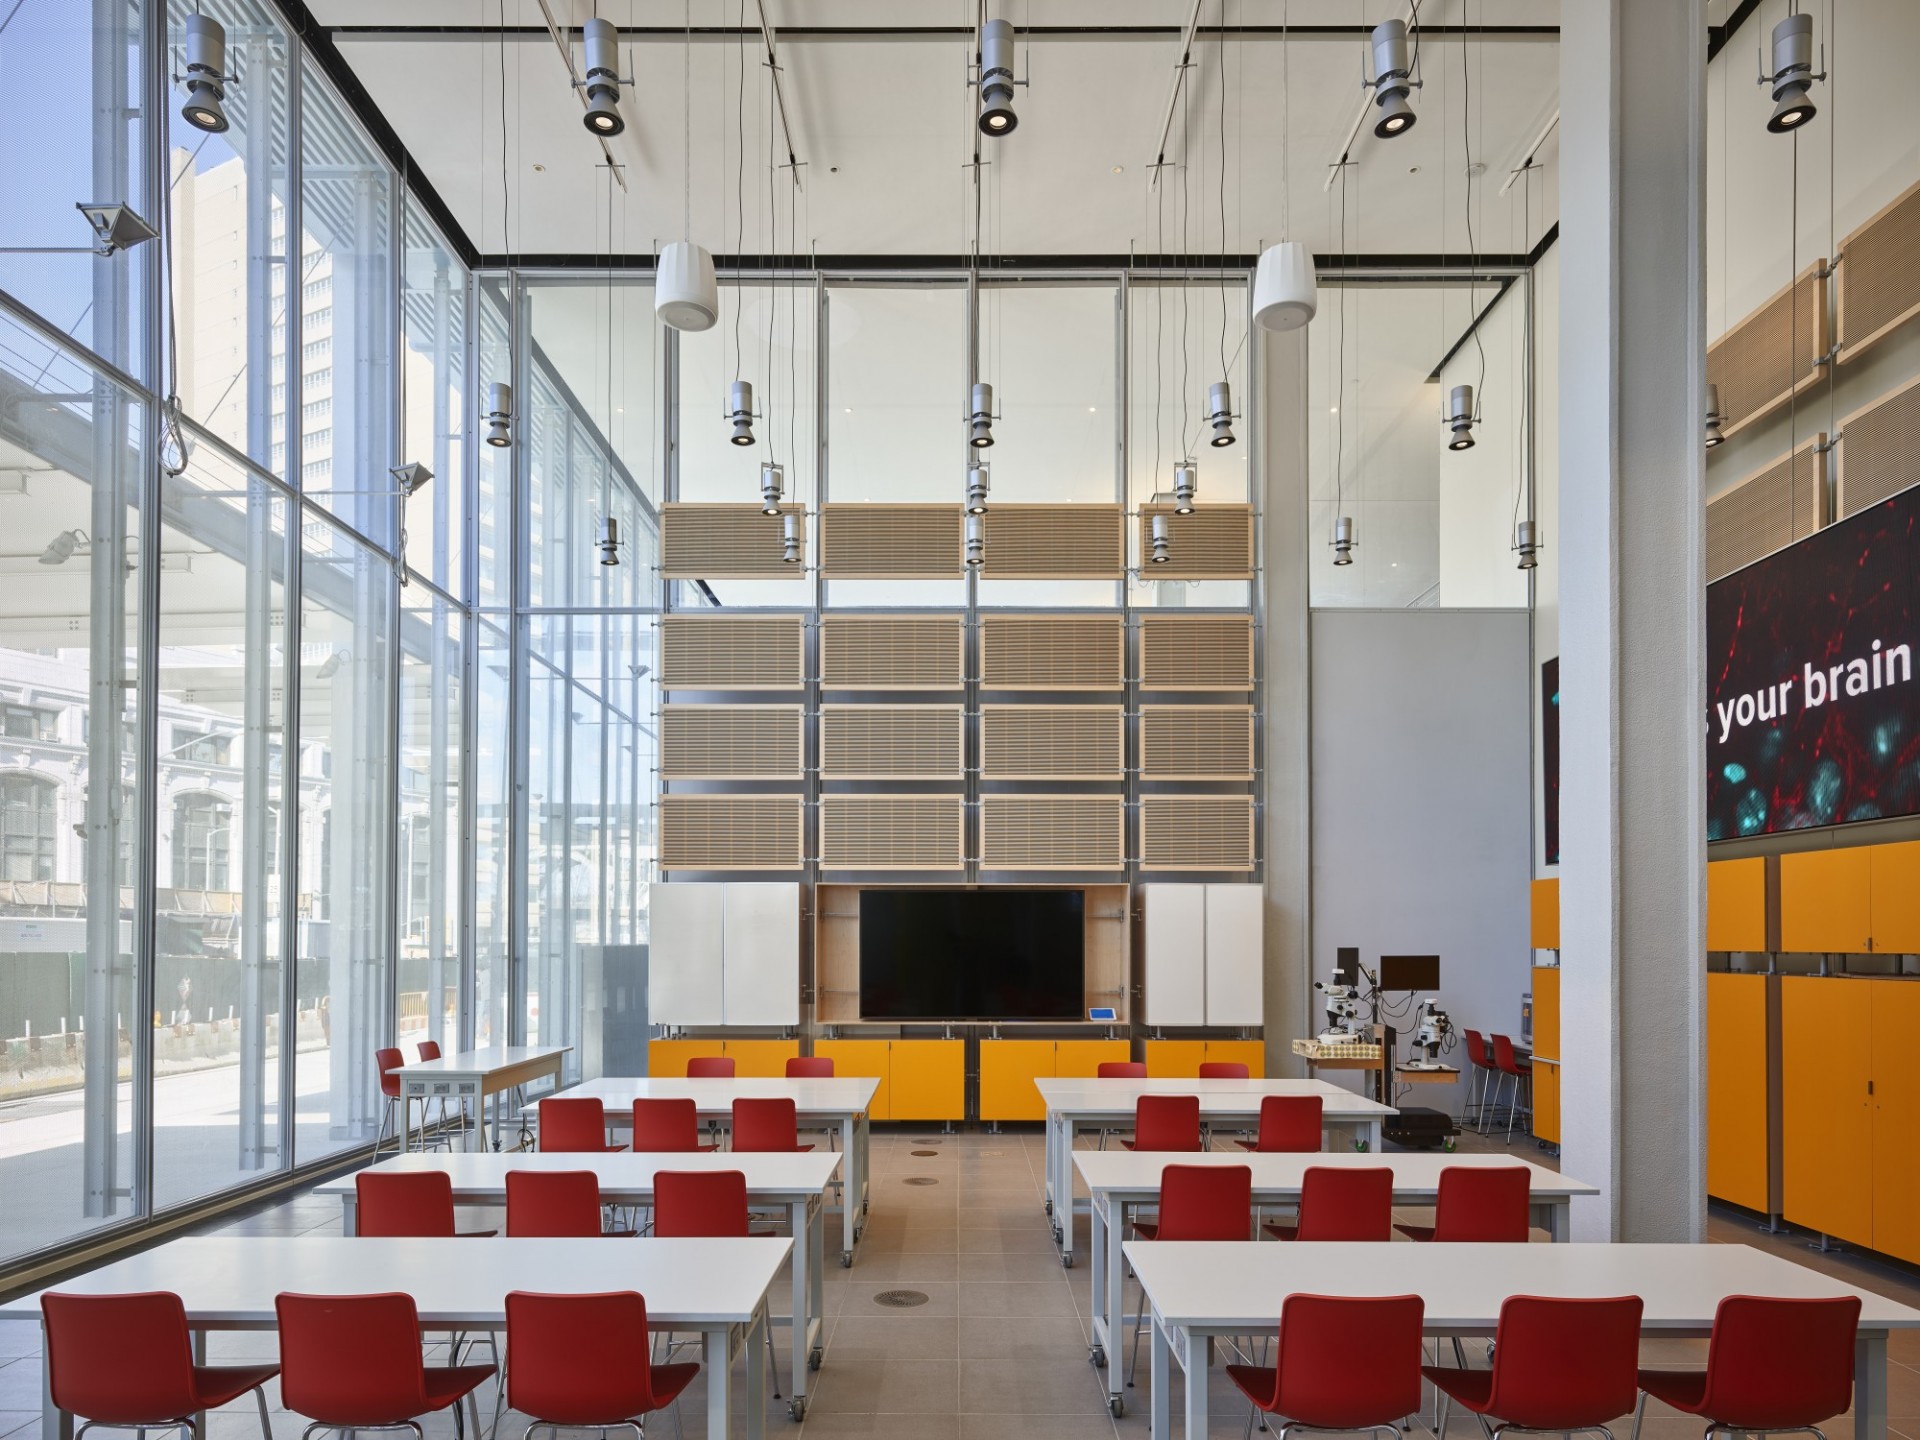 A classroom in the JLG Science Center with rows of red chairs at white, bench-style tables facing a TV monitor.